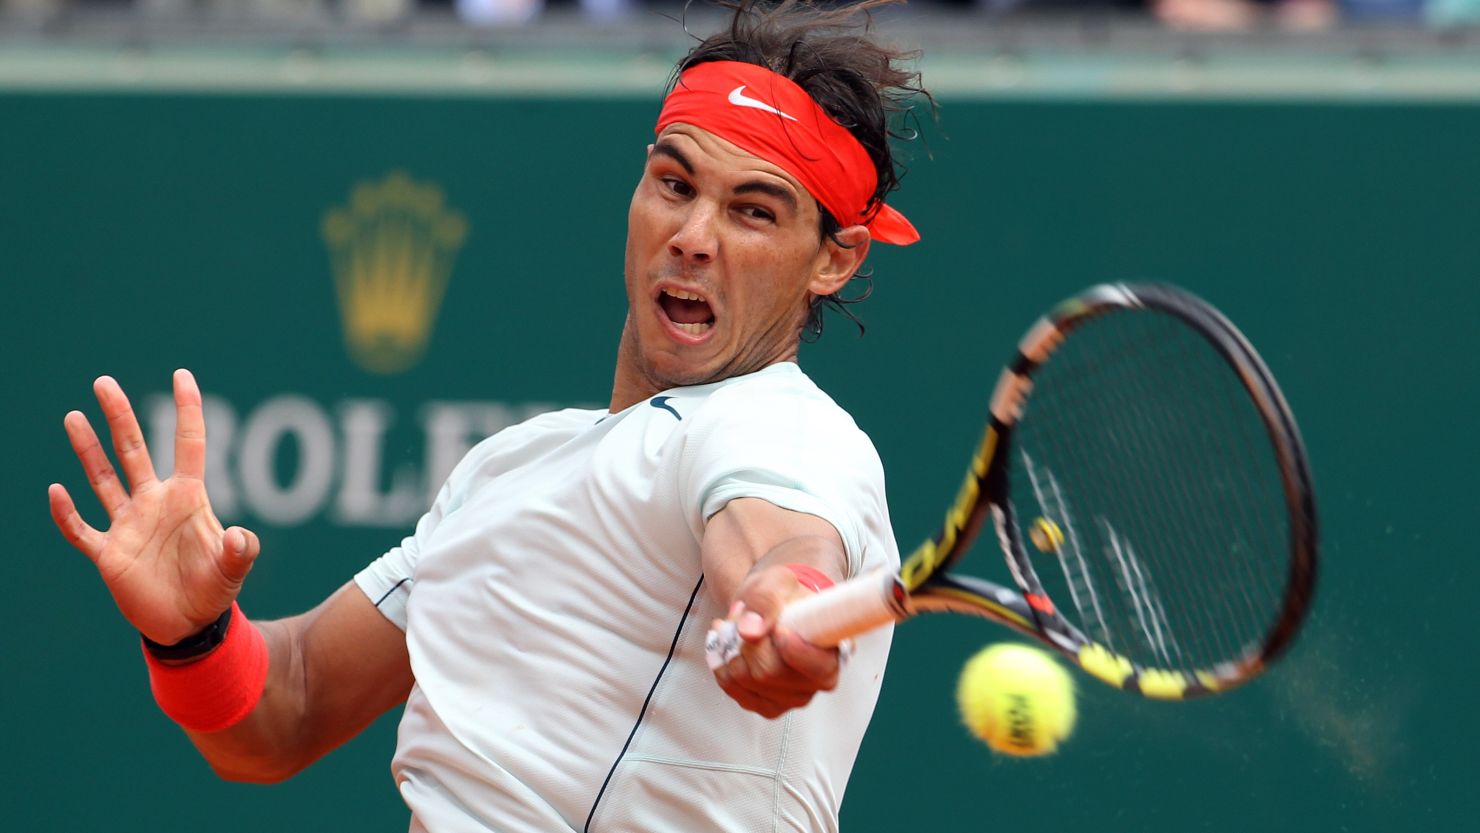 Rafael Nadal overcame the challenge of Bulgaria's Grigor Dimitrov in the last eight of the Monte Carlo Masters.